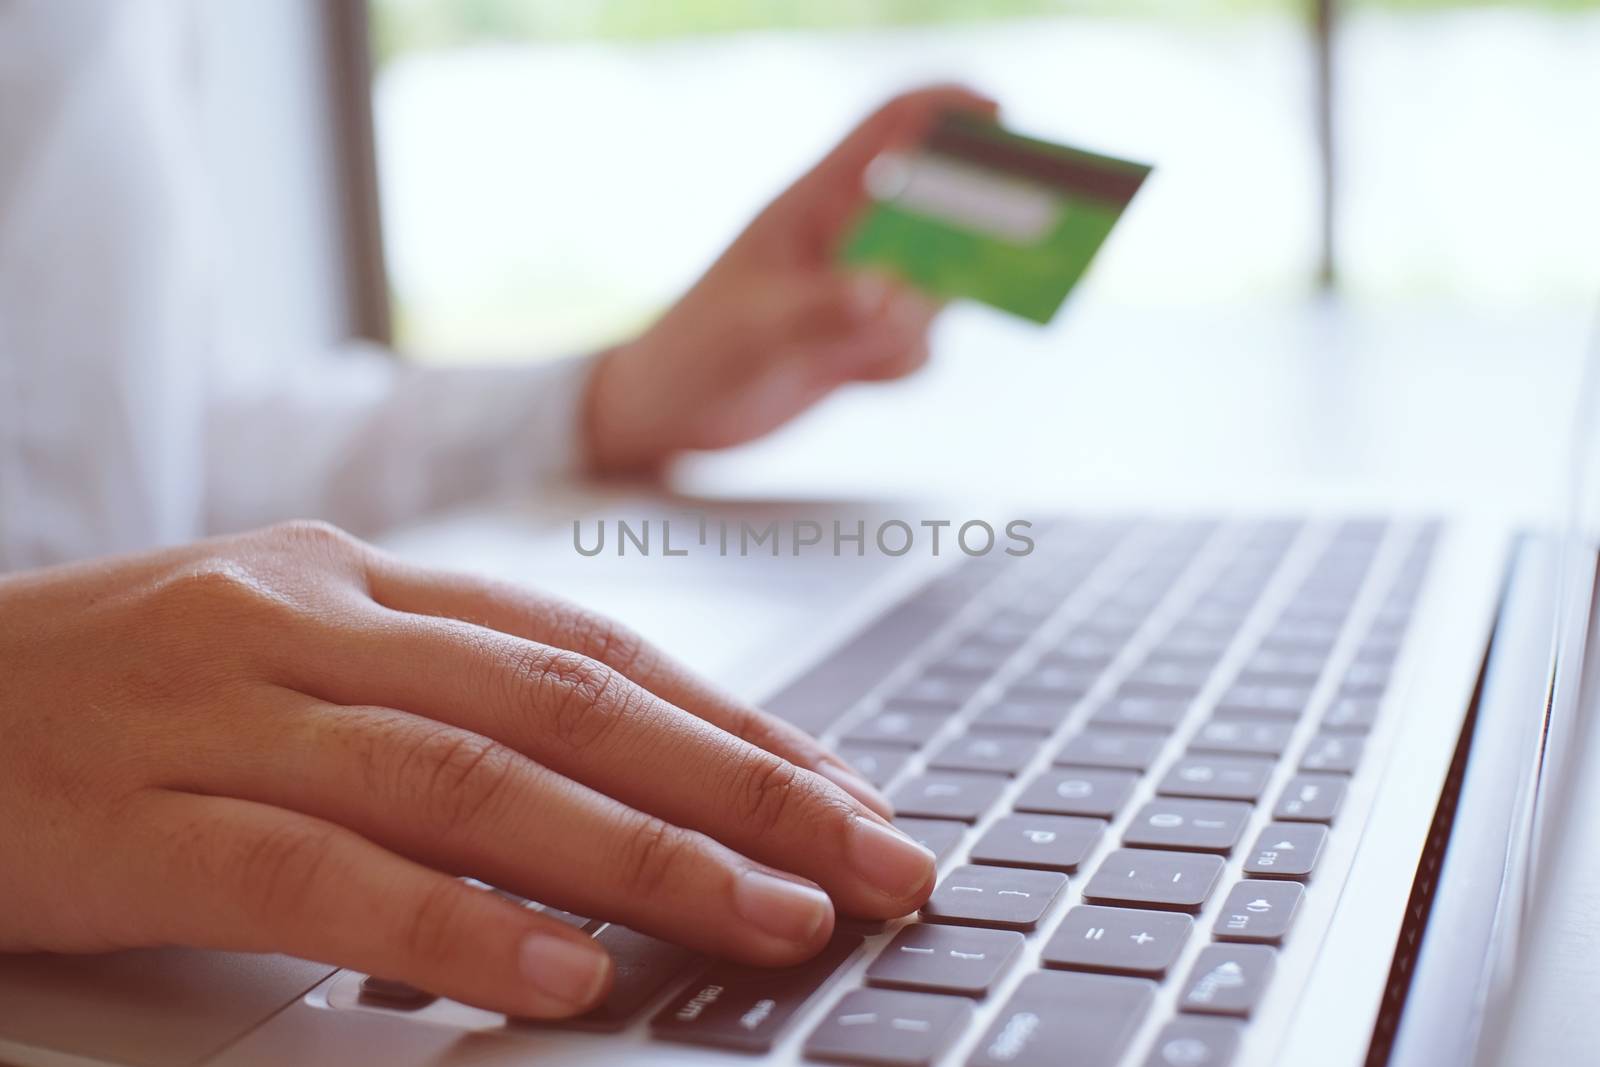 Business Woman Hands holding plastic credit card and using laptop smart phone Online shopping concept